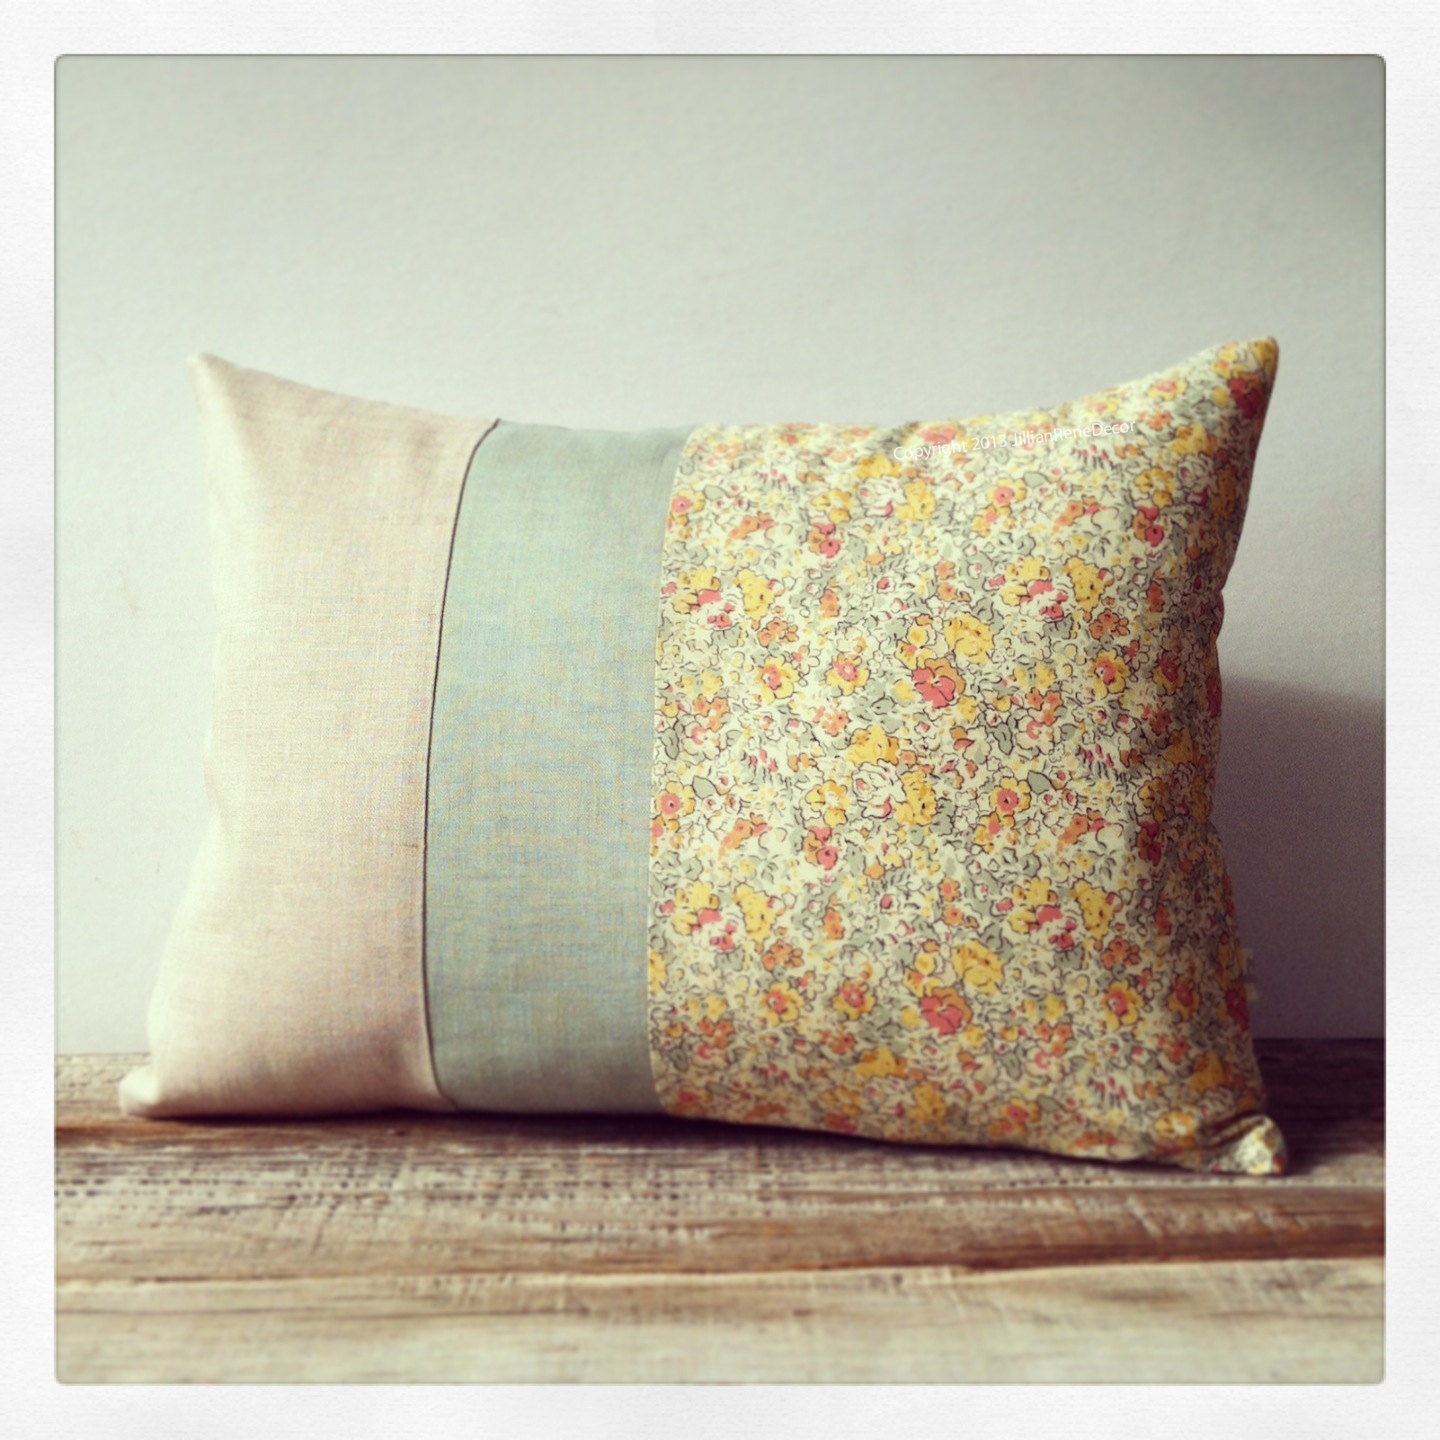 LIMITED EDITION: Floral Liberty Print Decorative Pillow by JillianReneDecor - Abstract Flowers - Spring Home Decor - Claire-Aude T Tawn Lawn - JillianReneDecor